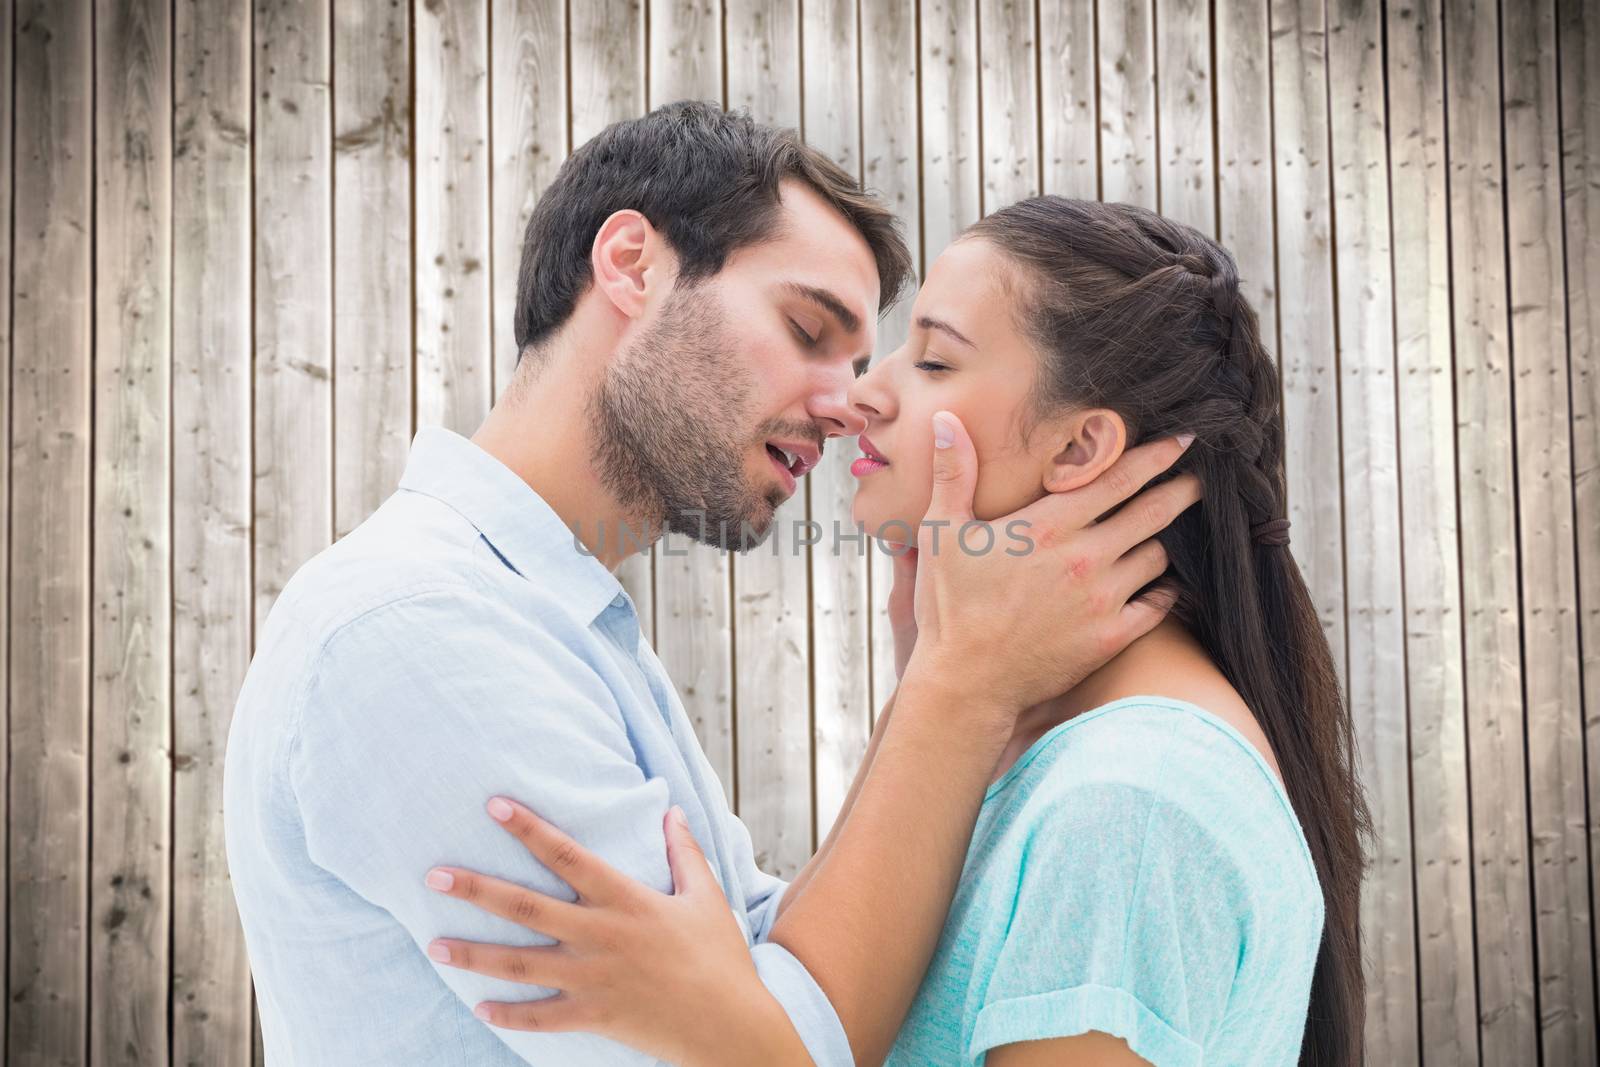 Attractive young couple about to kiss against wooden planks background